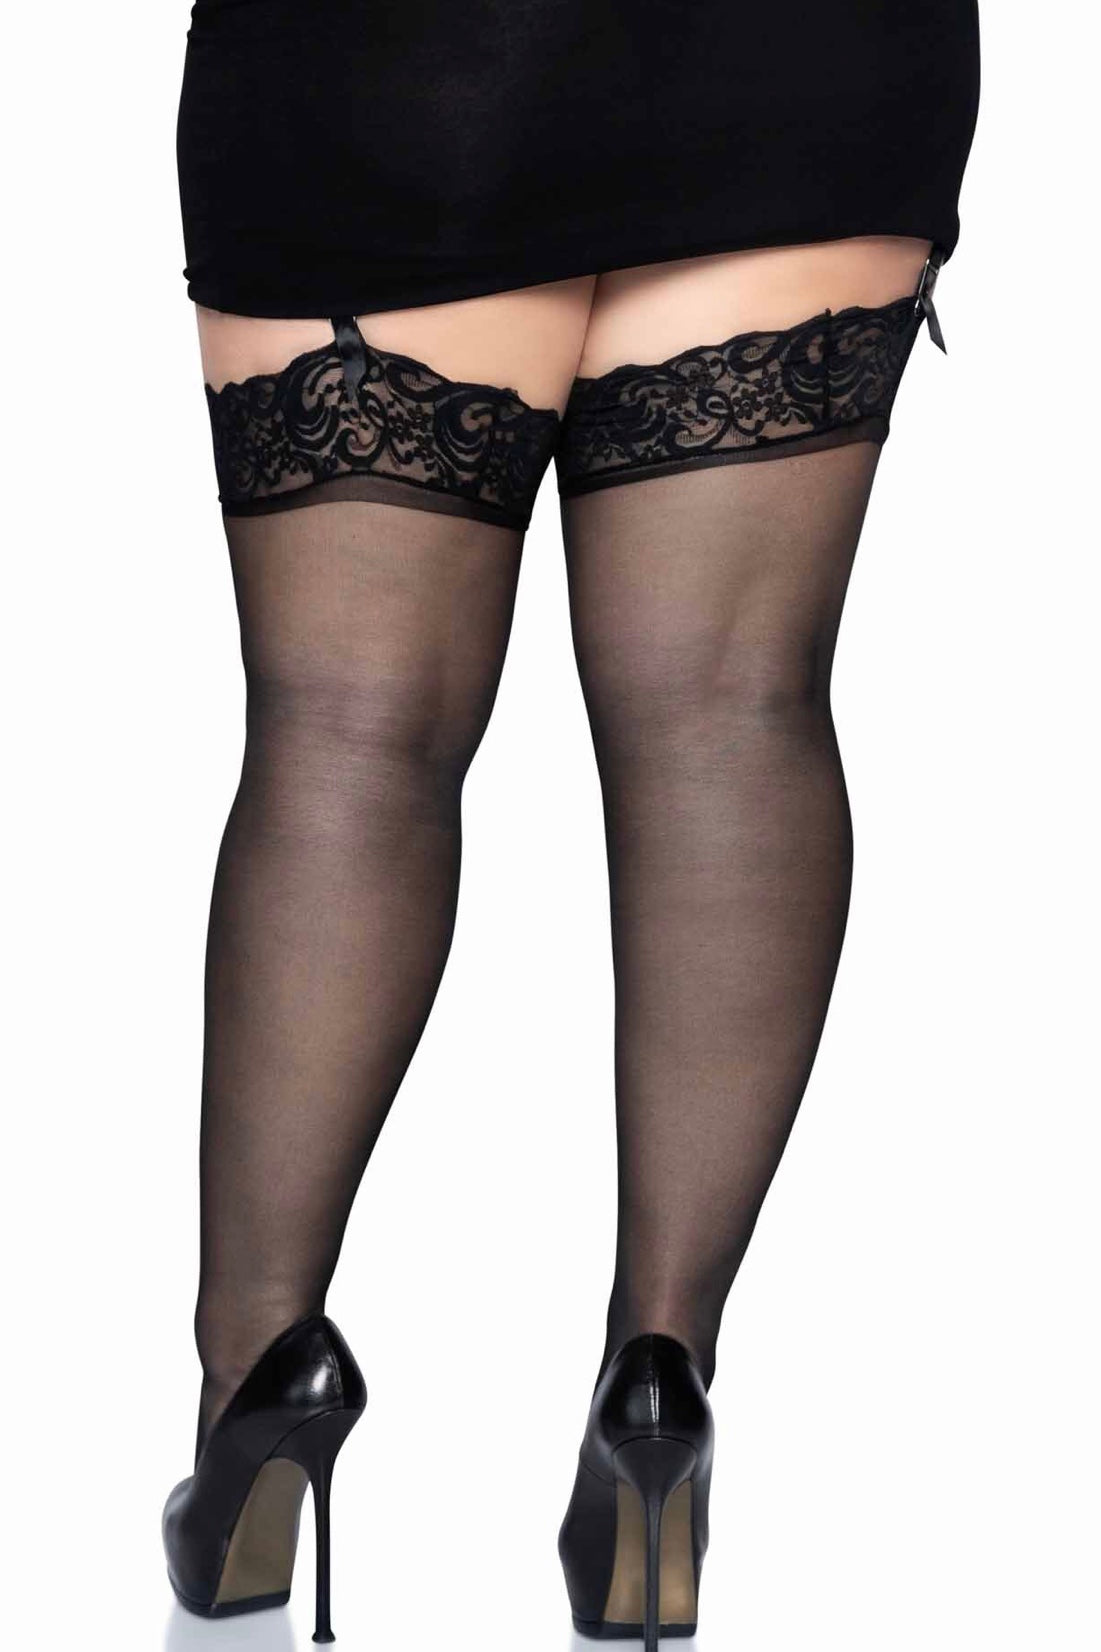 Nylon Sheer Thigh High with Lace Top - CurvynBeautiful 